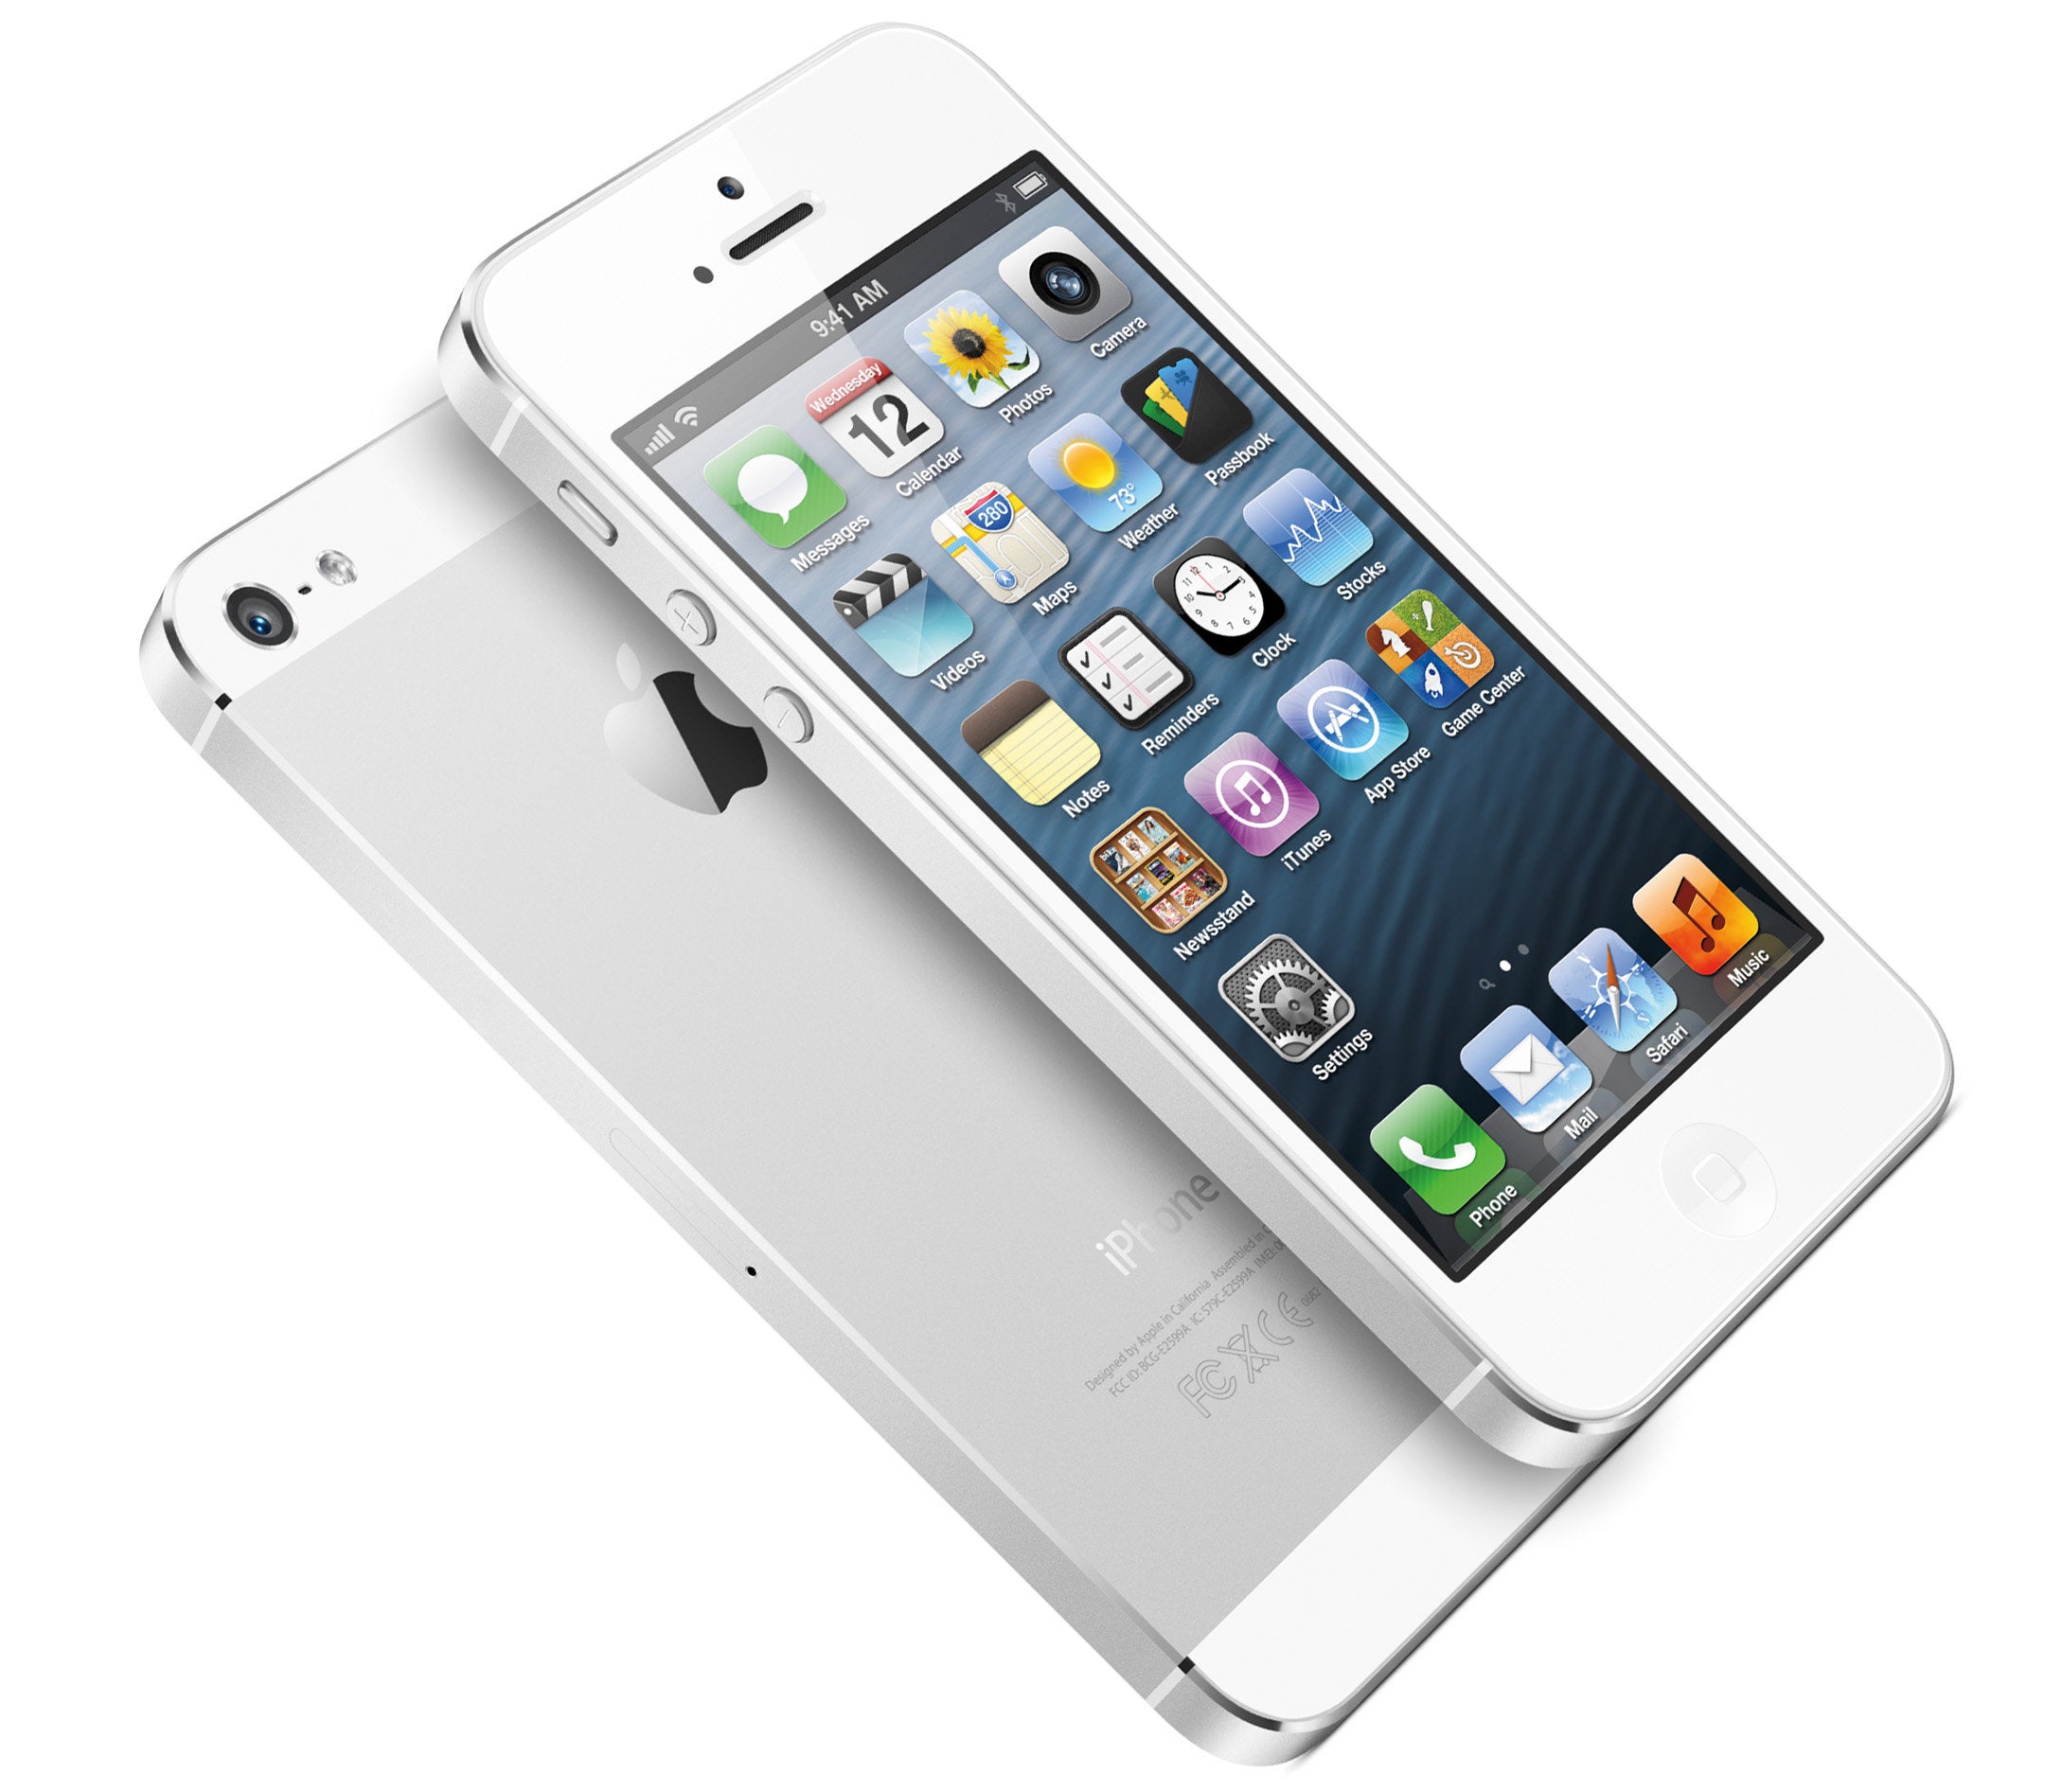 The Apple iPhone 5S will allegedly look like the Apple iPhone 5 with a polycarbonate body - Report: Three new Apple iPhone variants coming in 2013, including 4.8 inch model